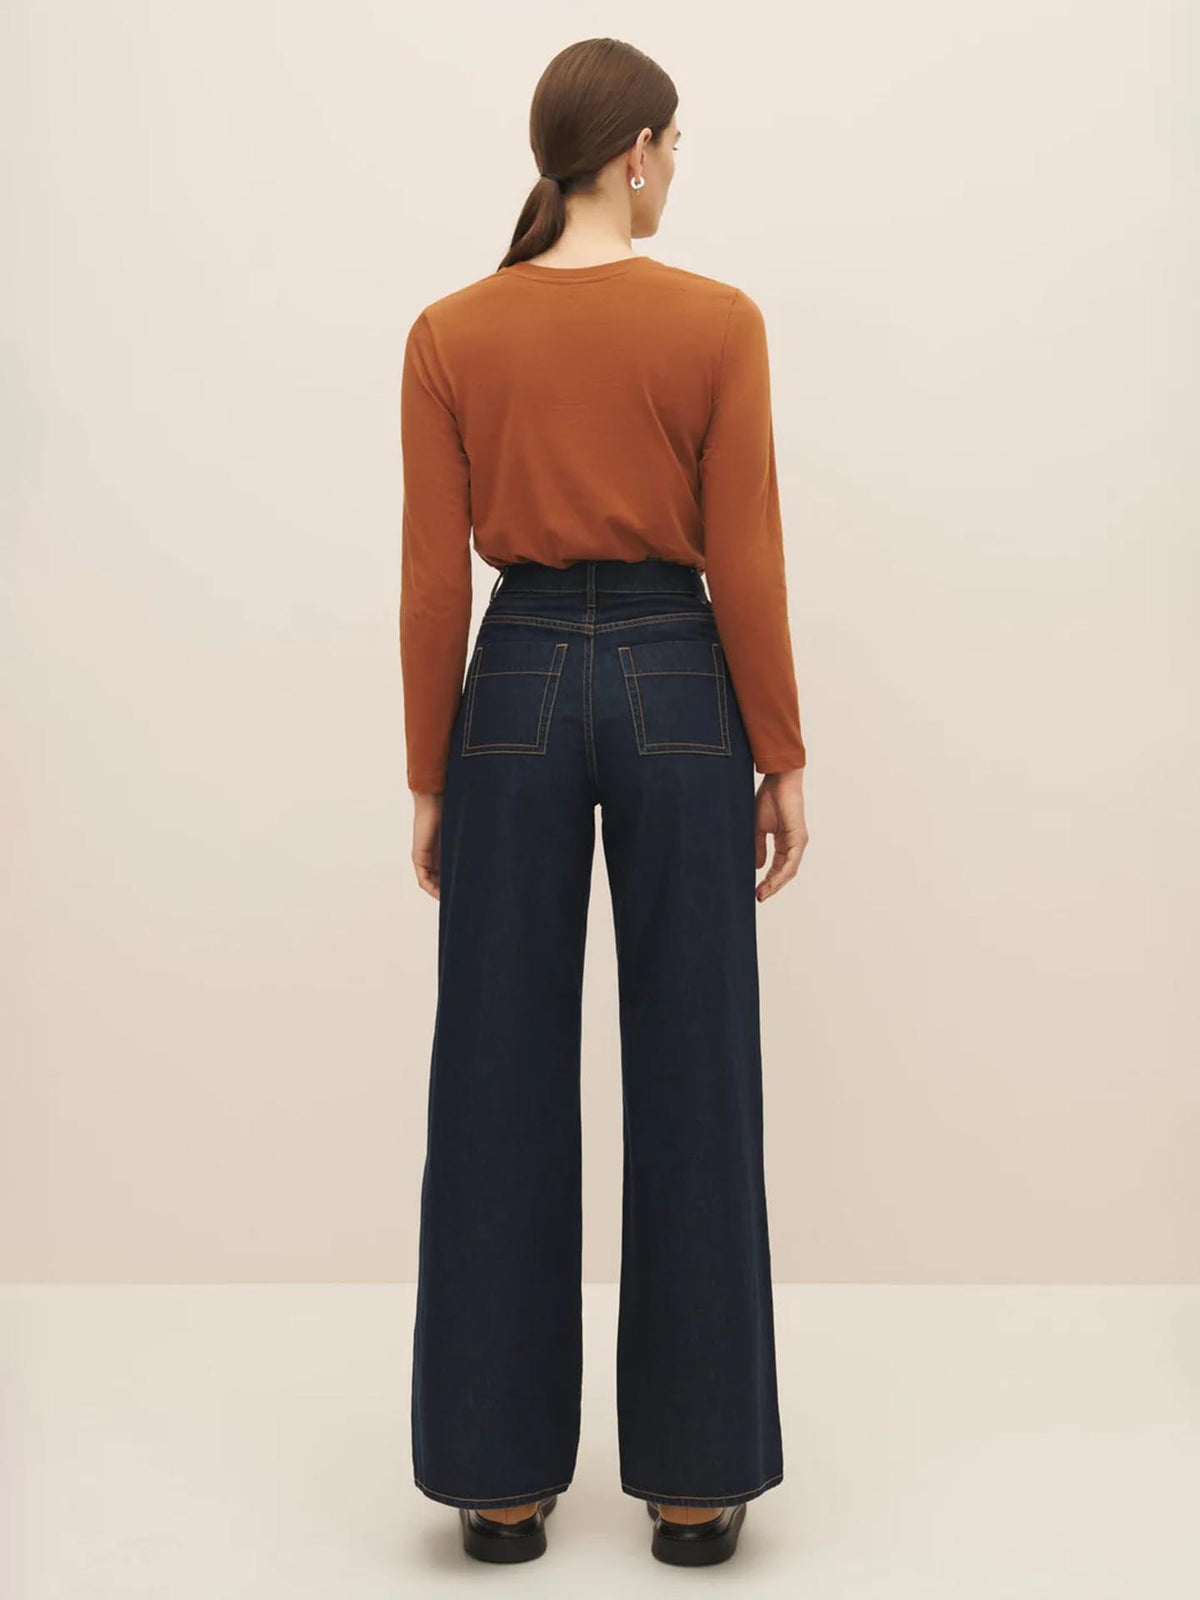 A woman viewed from the back wearing a rust-colored top and Indigo Denim High Puddle Jeans, standing against a light beige background by Kowtow.